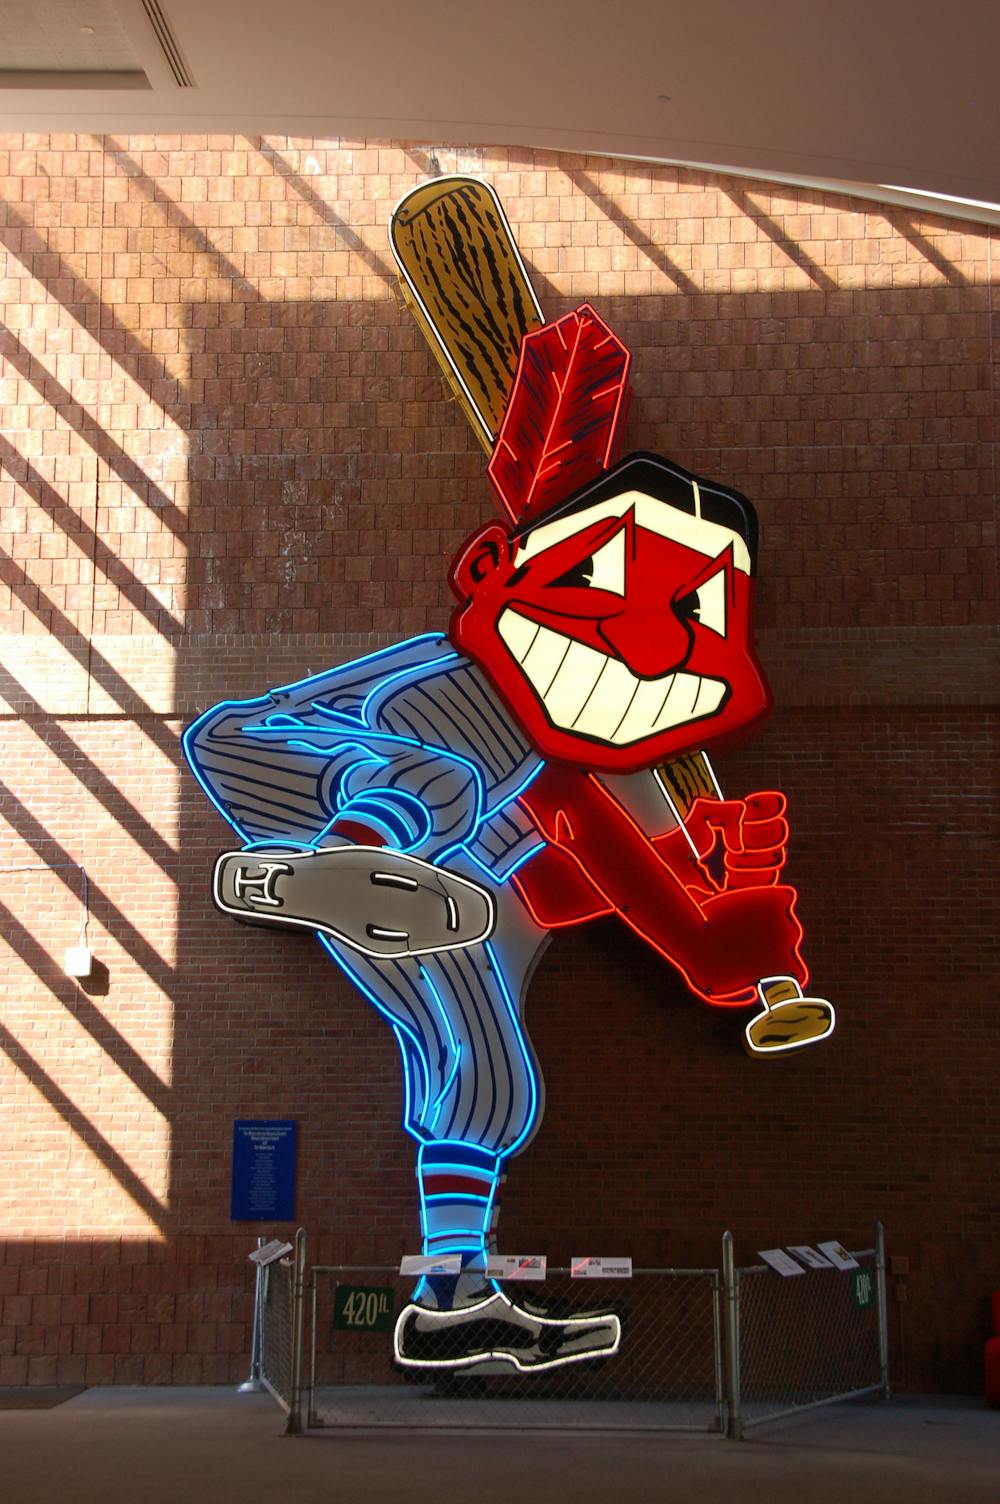 Cleveland Indians eliminating Chief Wahoo logo from gear 